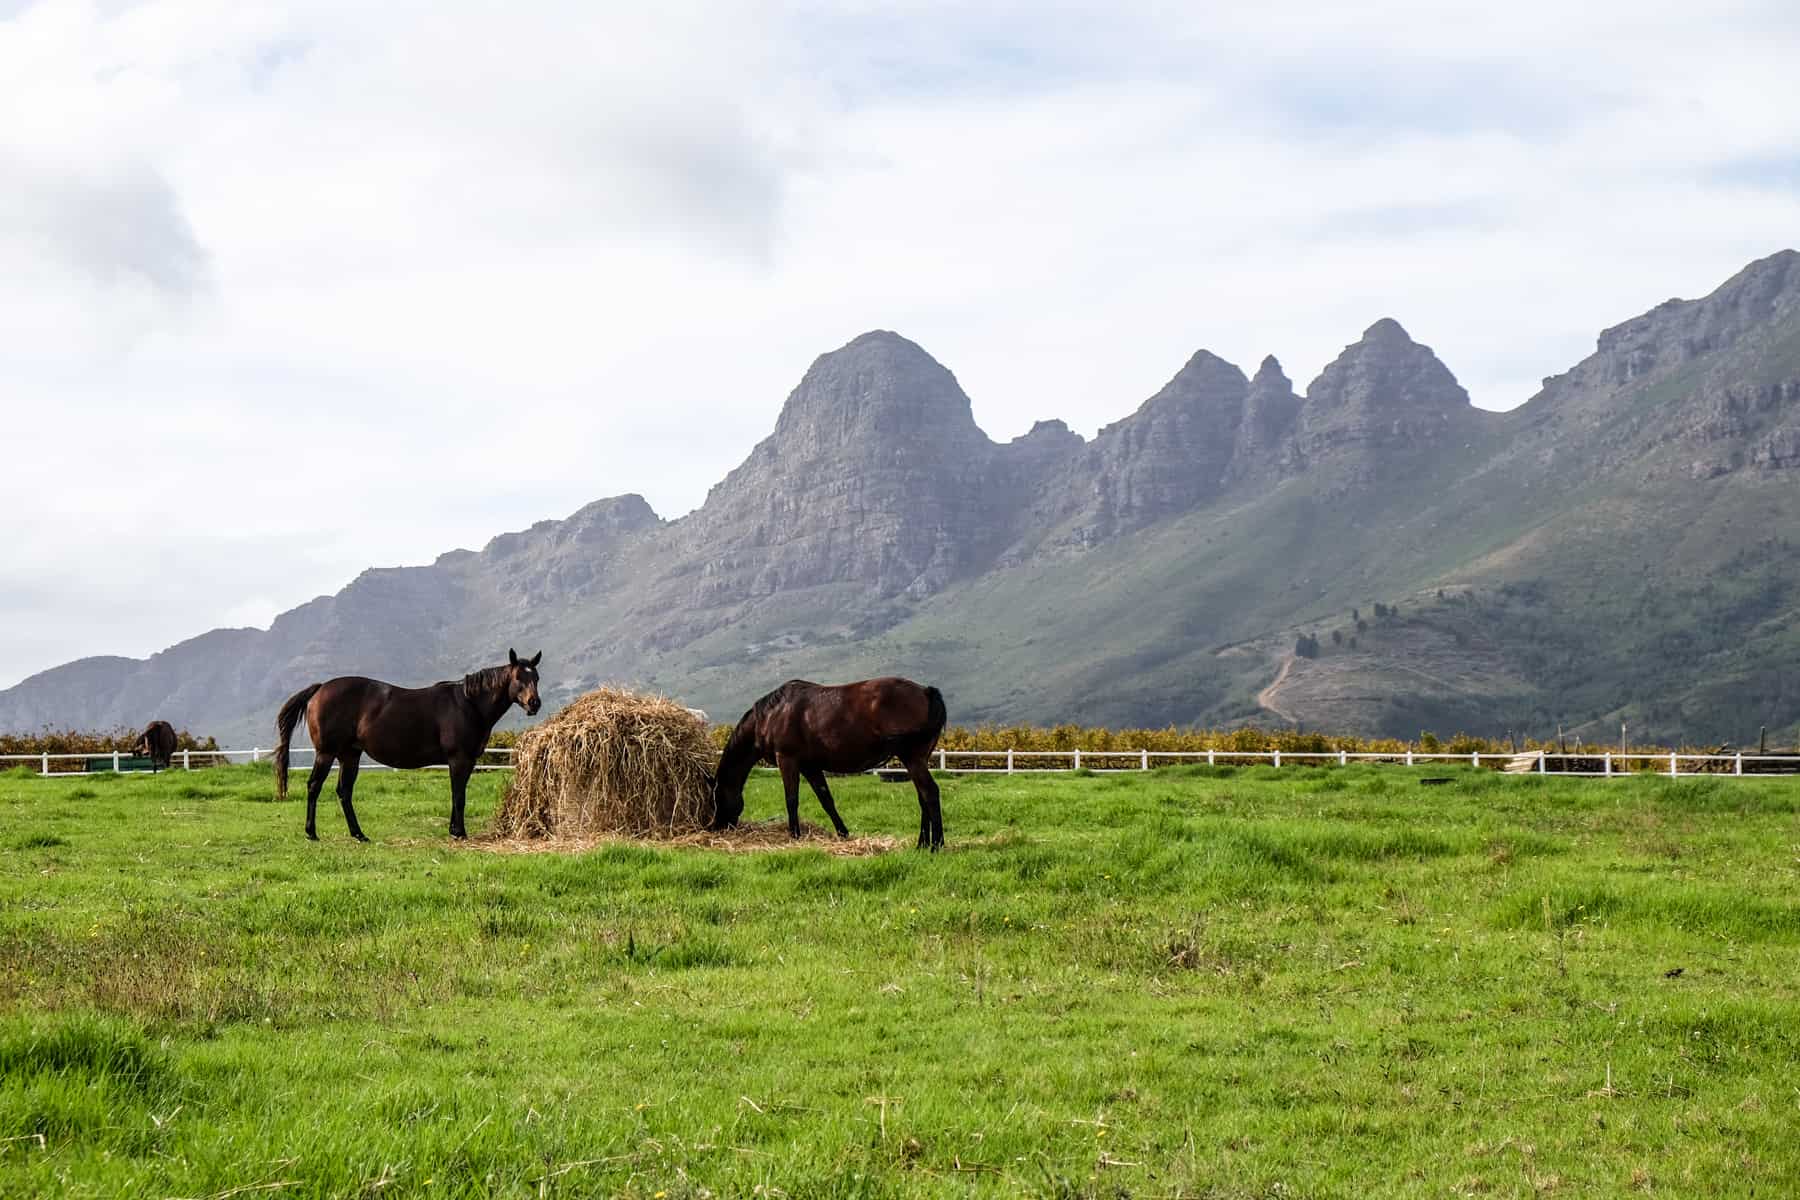 Two horses graze on a lump of hay in a green field backed by jagged mountain peaks in South Africa